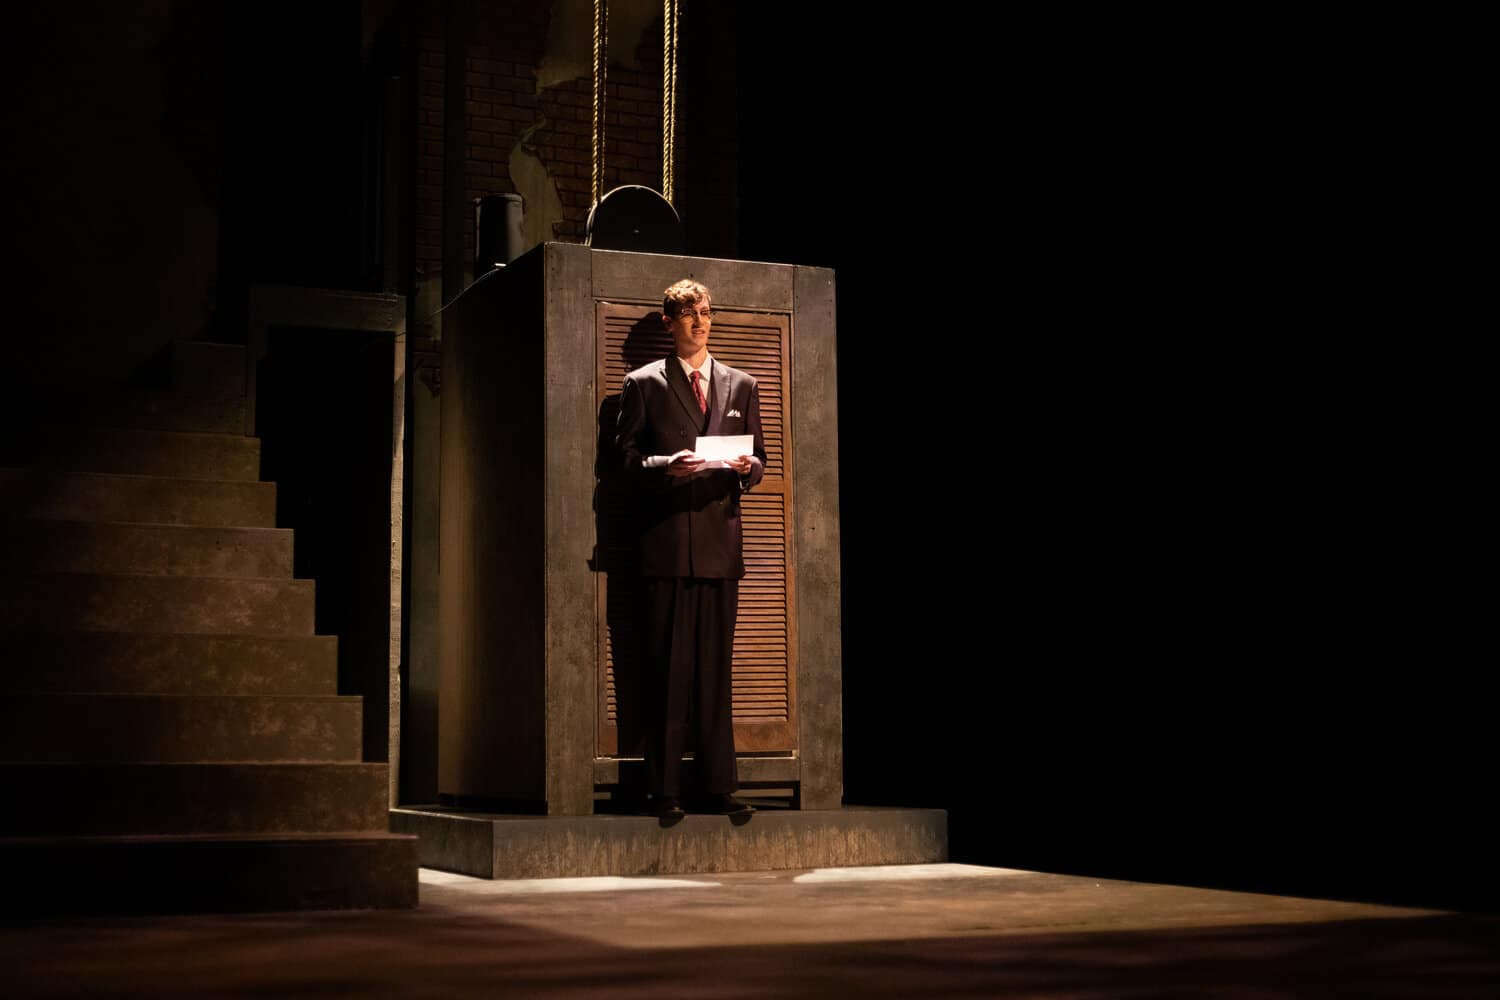 JP Warnick, playing Eurydice’s father, read a note written to Eurydice in one of the opening scenes of the play.